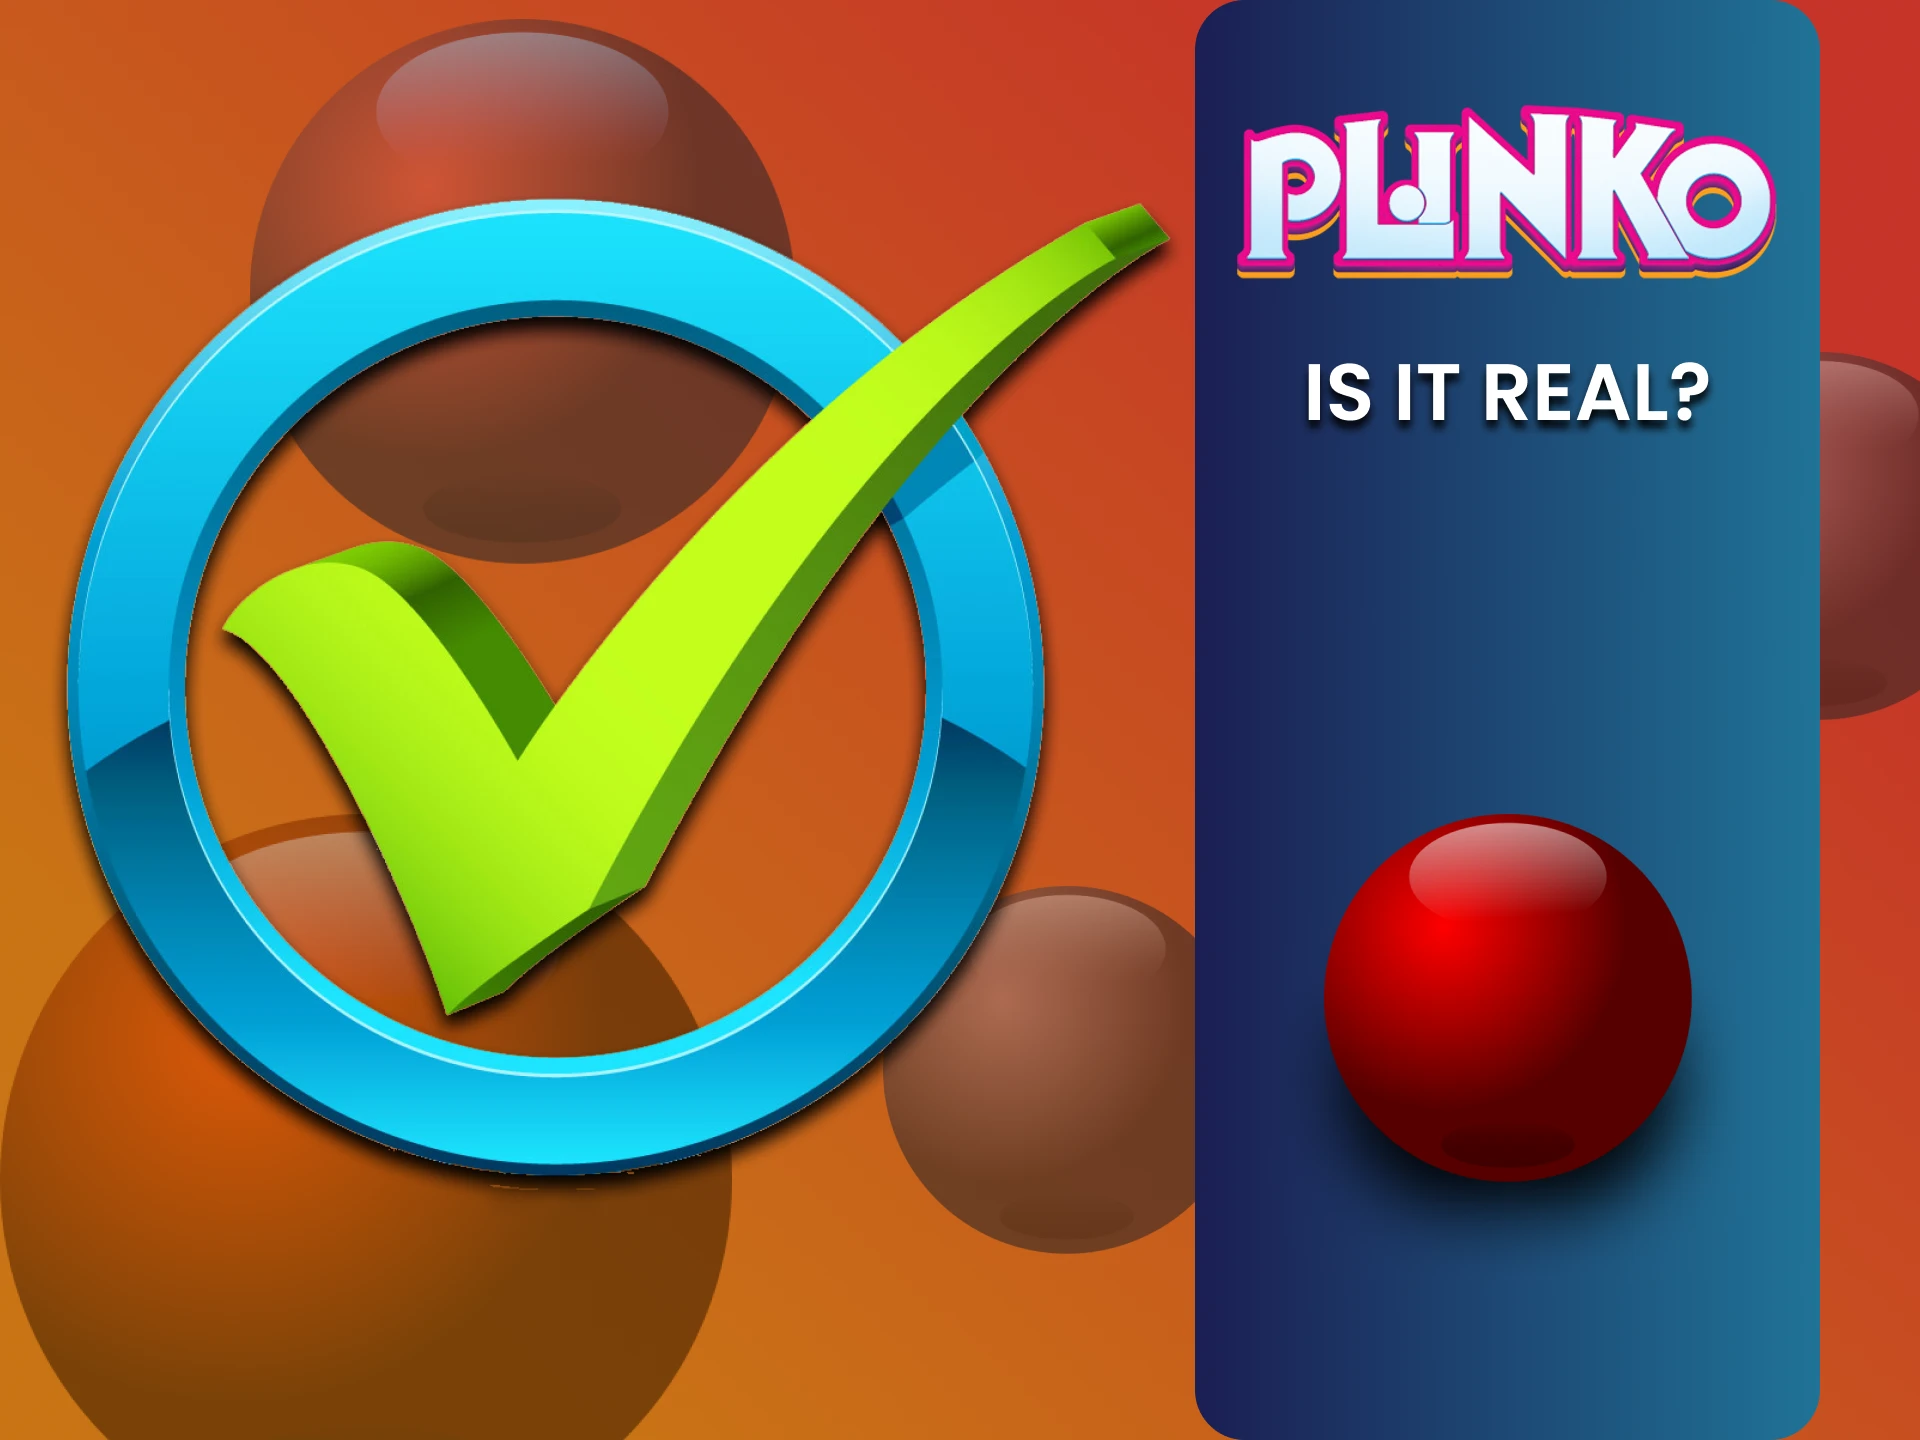 Yes, you can play Plinko through an app on your smartphone.